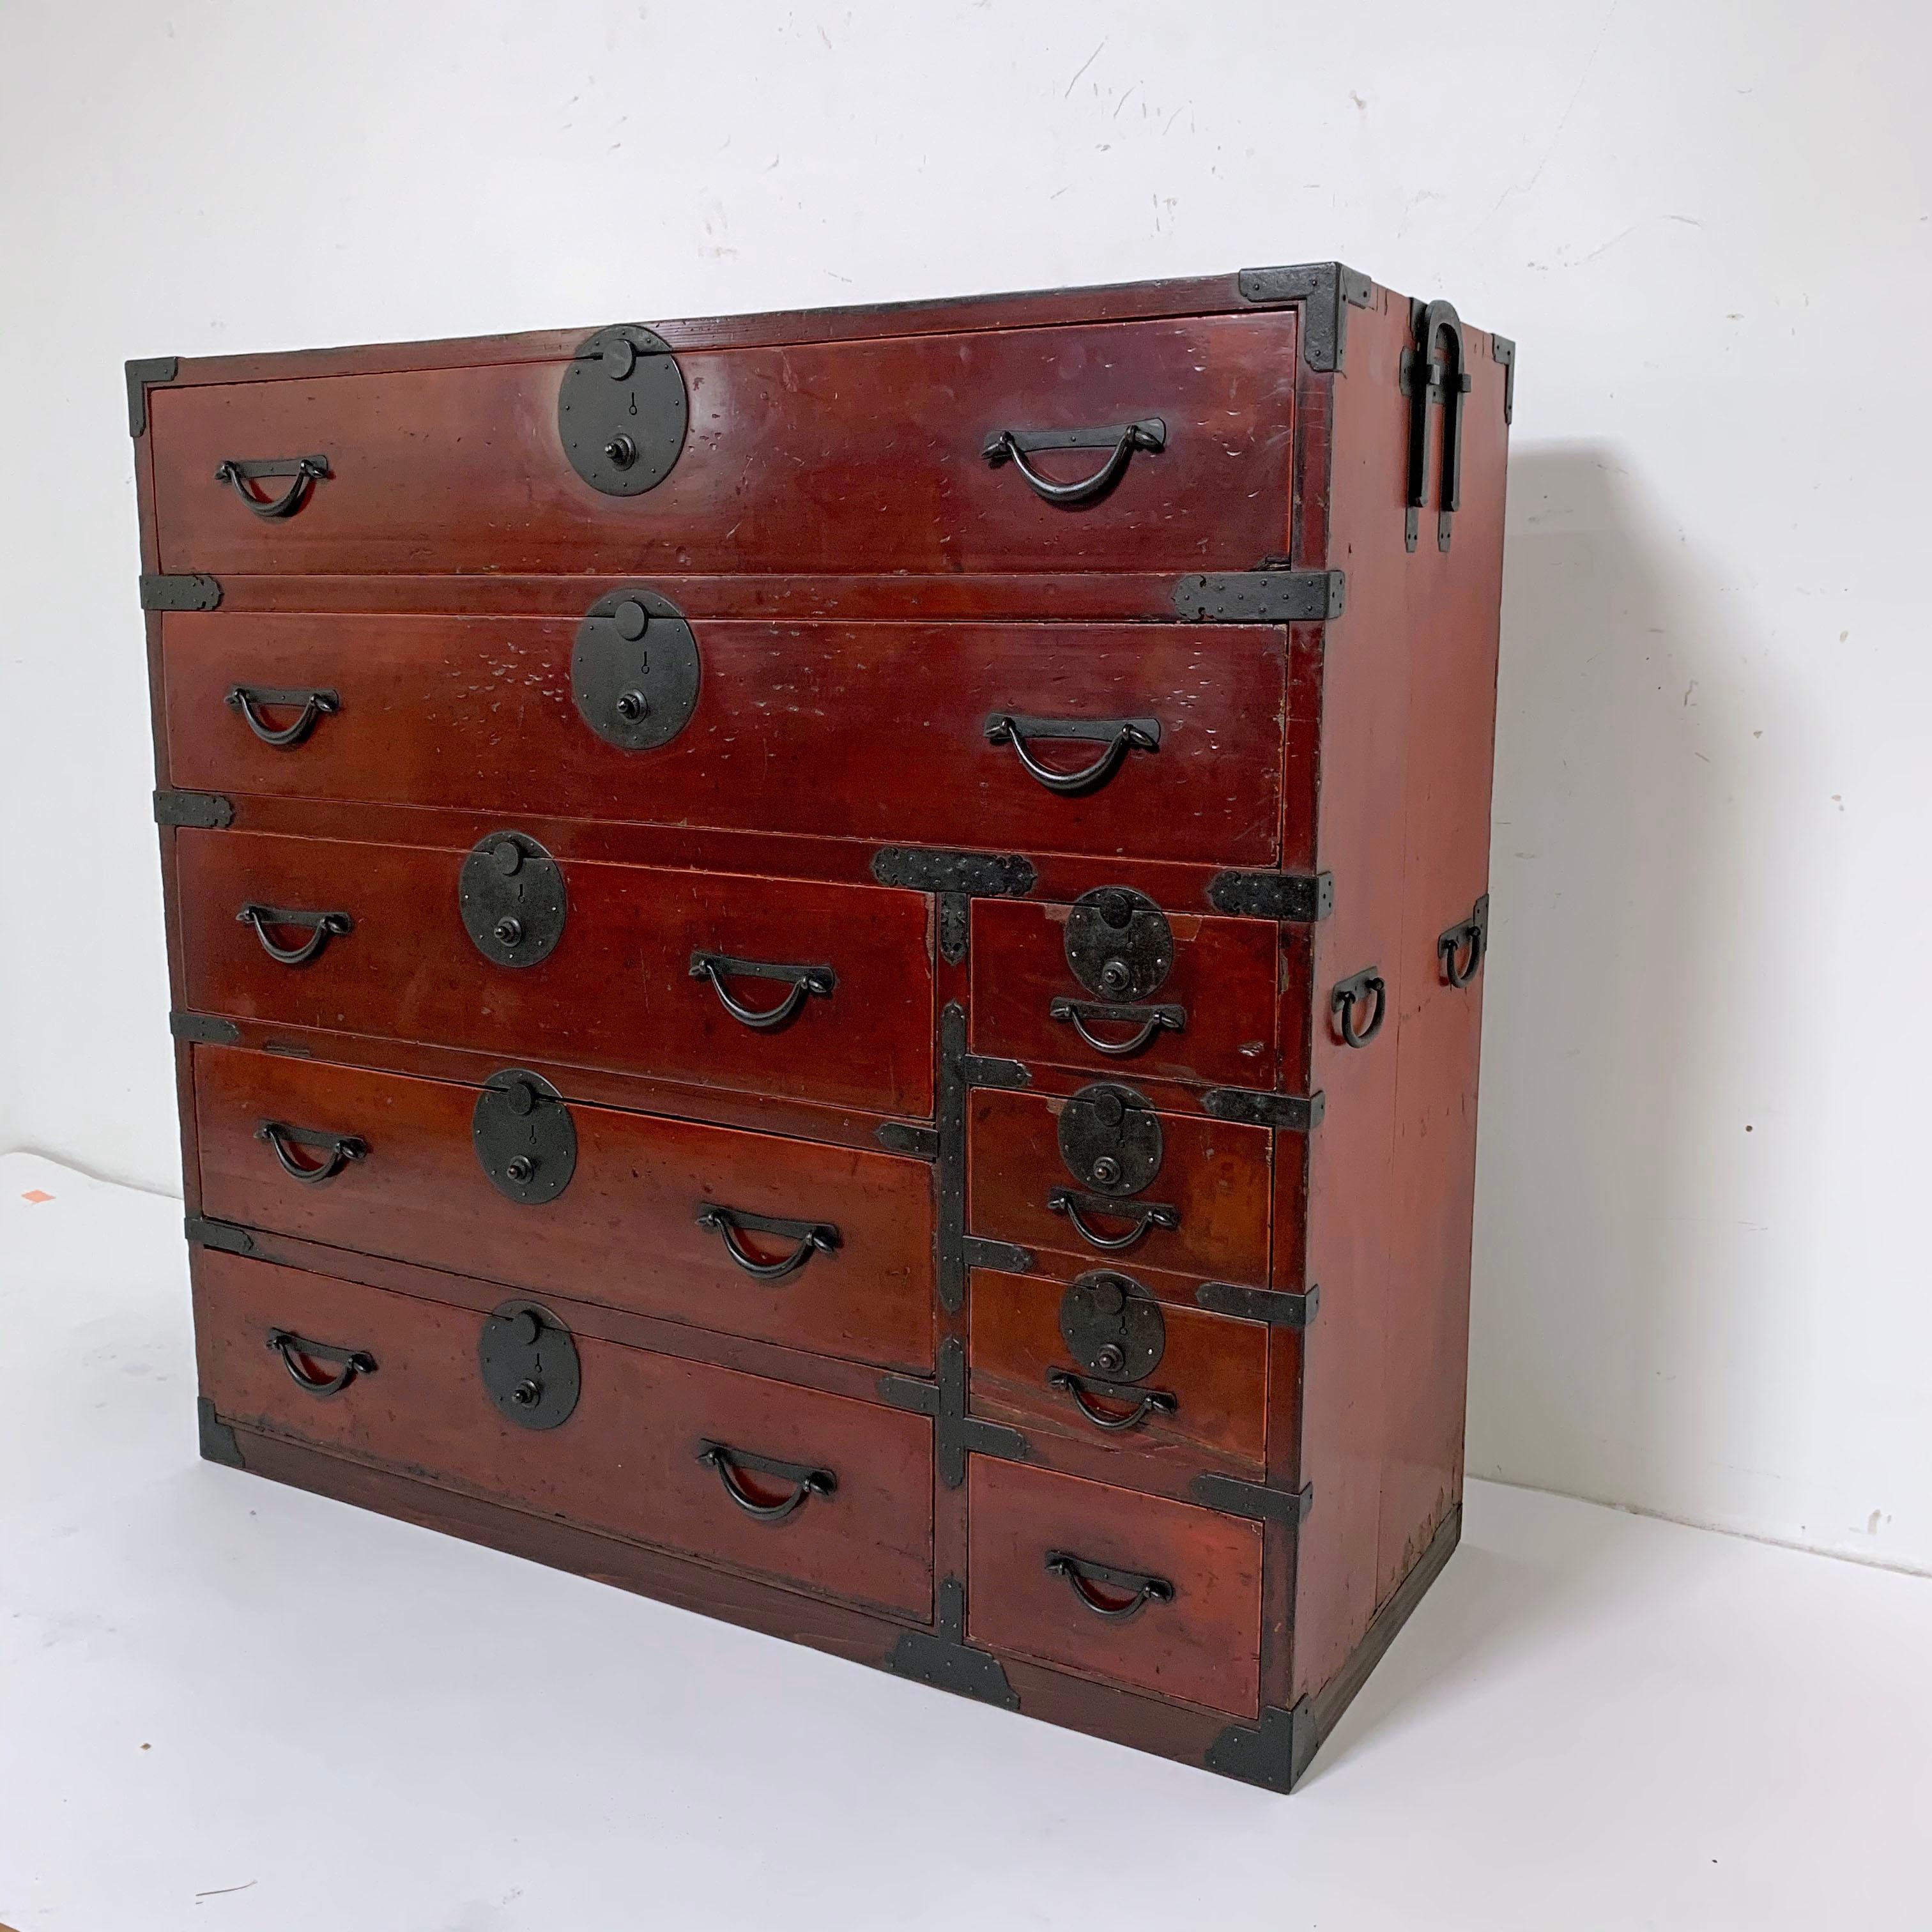 19th century Japanese tansu Meiji period chest, featuring a rich dark amber lacquered finish and original hand forged iron hardware.
Case measures: 45.25